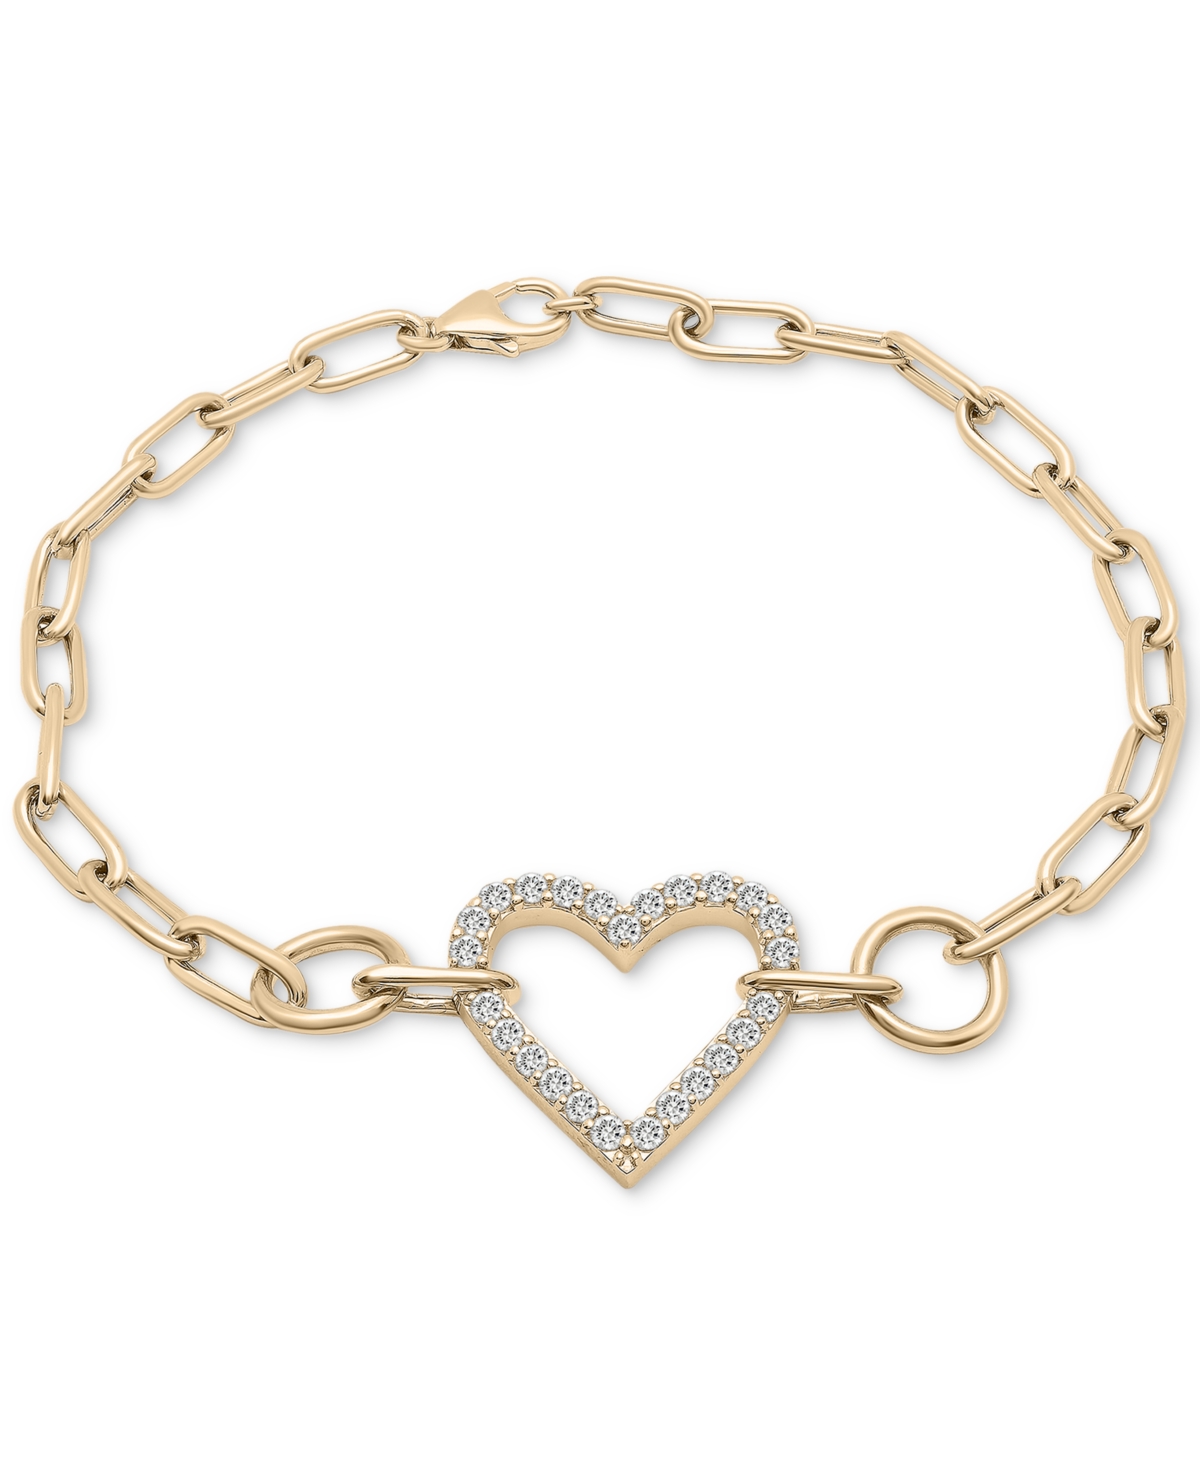 Diamond Heart Paperclip Link Bracelet (1/2 ct. t.w.) in 14k Gold, Created for Macy's - Yellow Gold